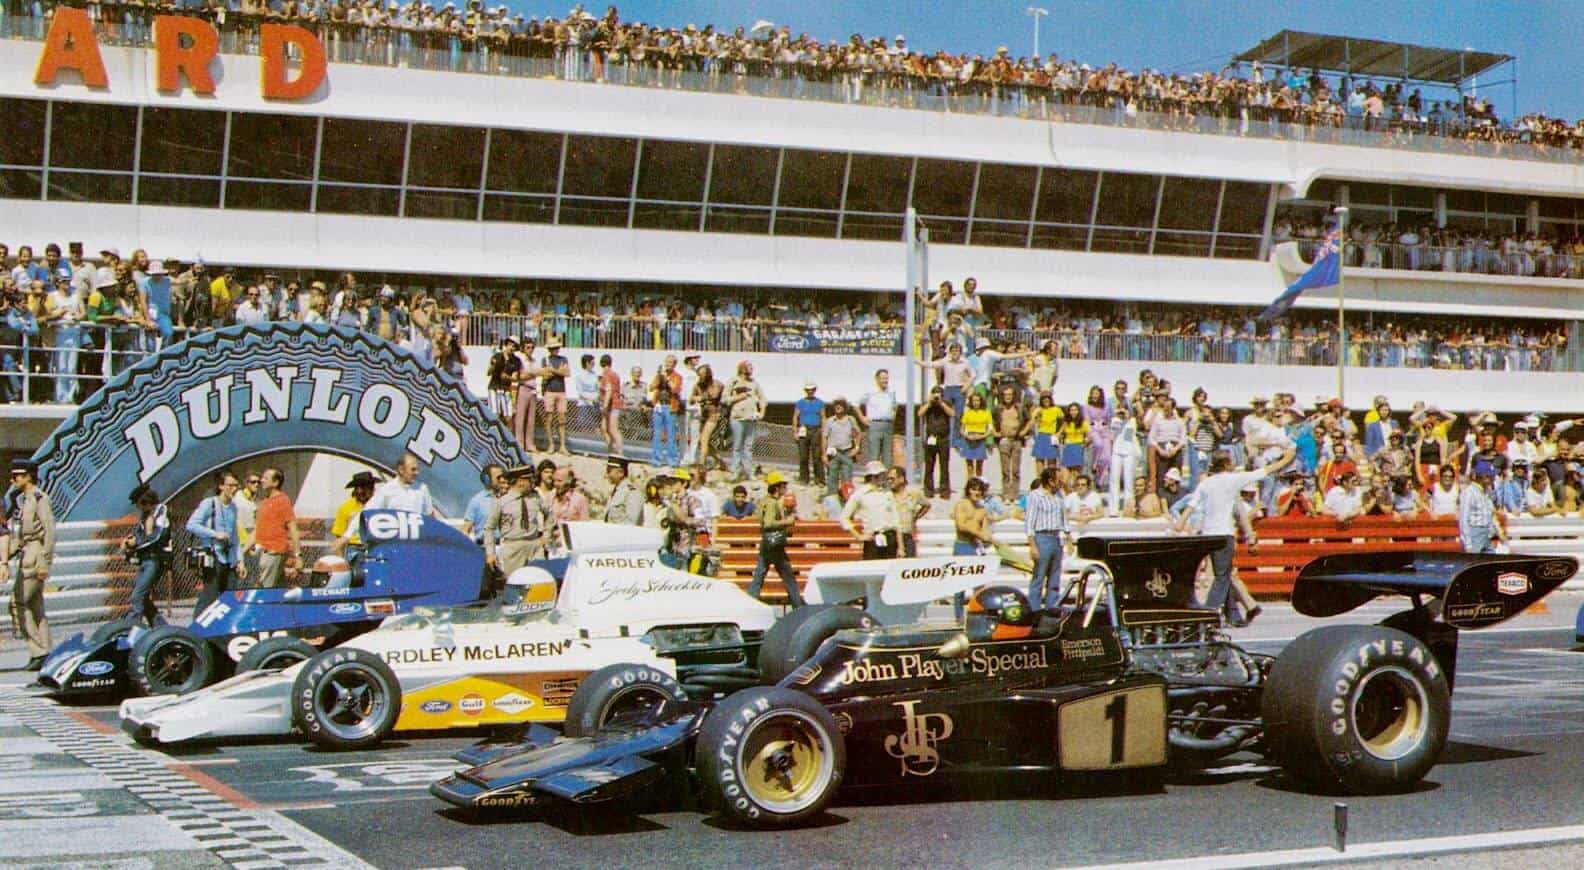 The start of the French Grand Prix in Paul Ricard on July 01, 1973.